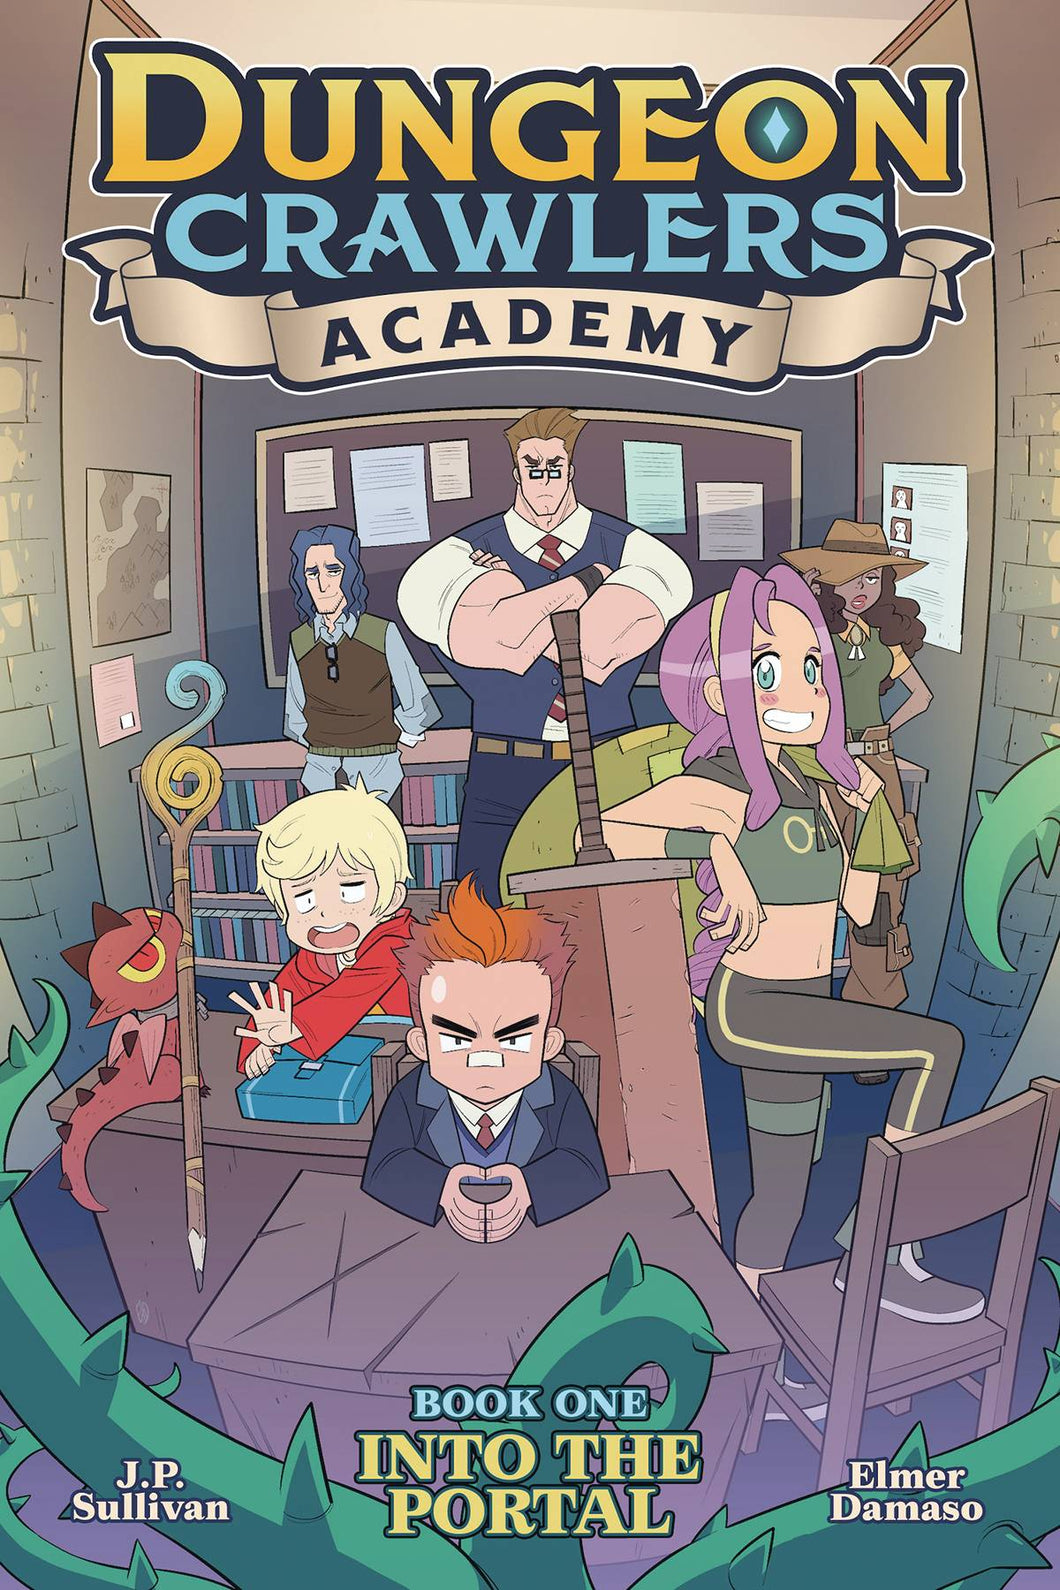 Dungeon Crawlers Academy GN Vol 01 Into The Portal - Books